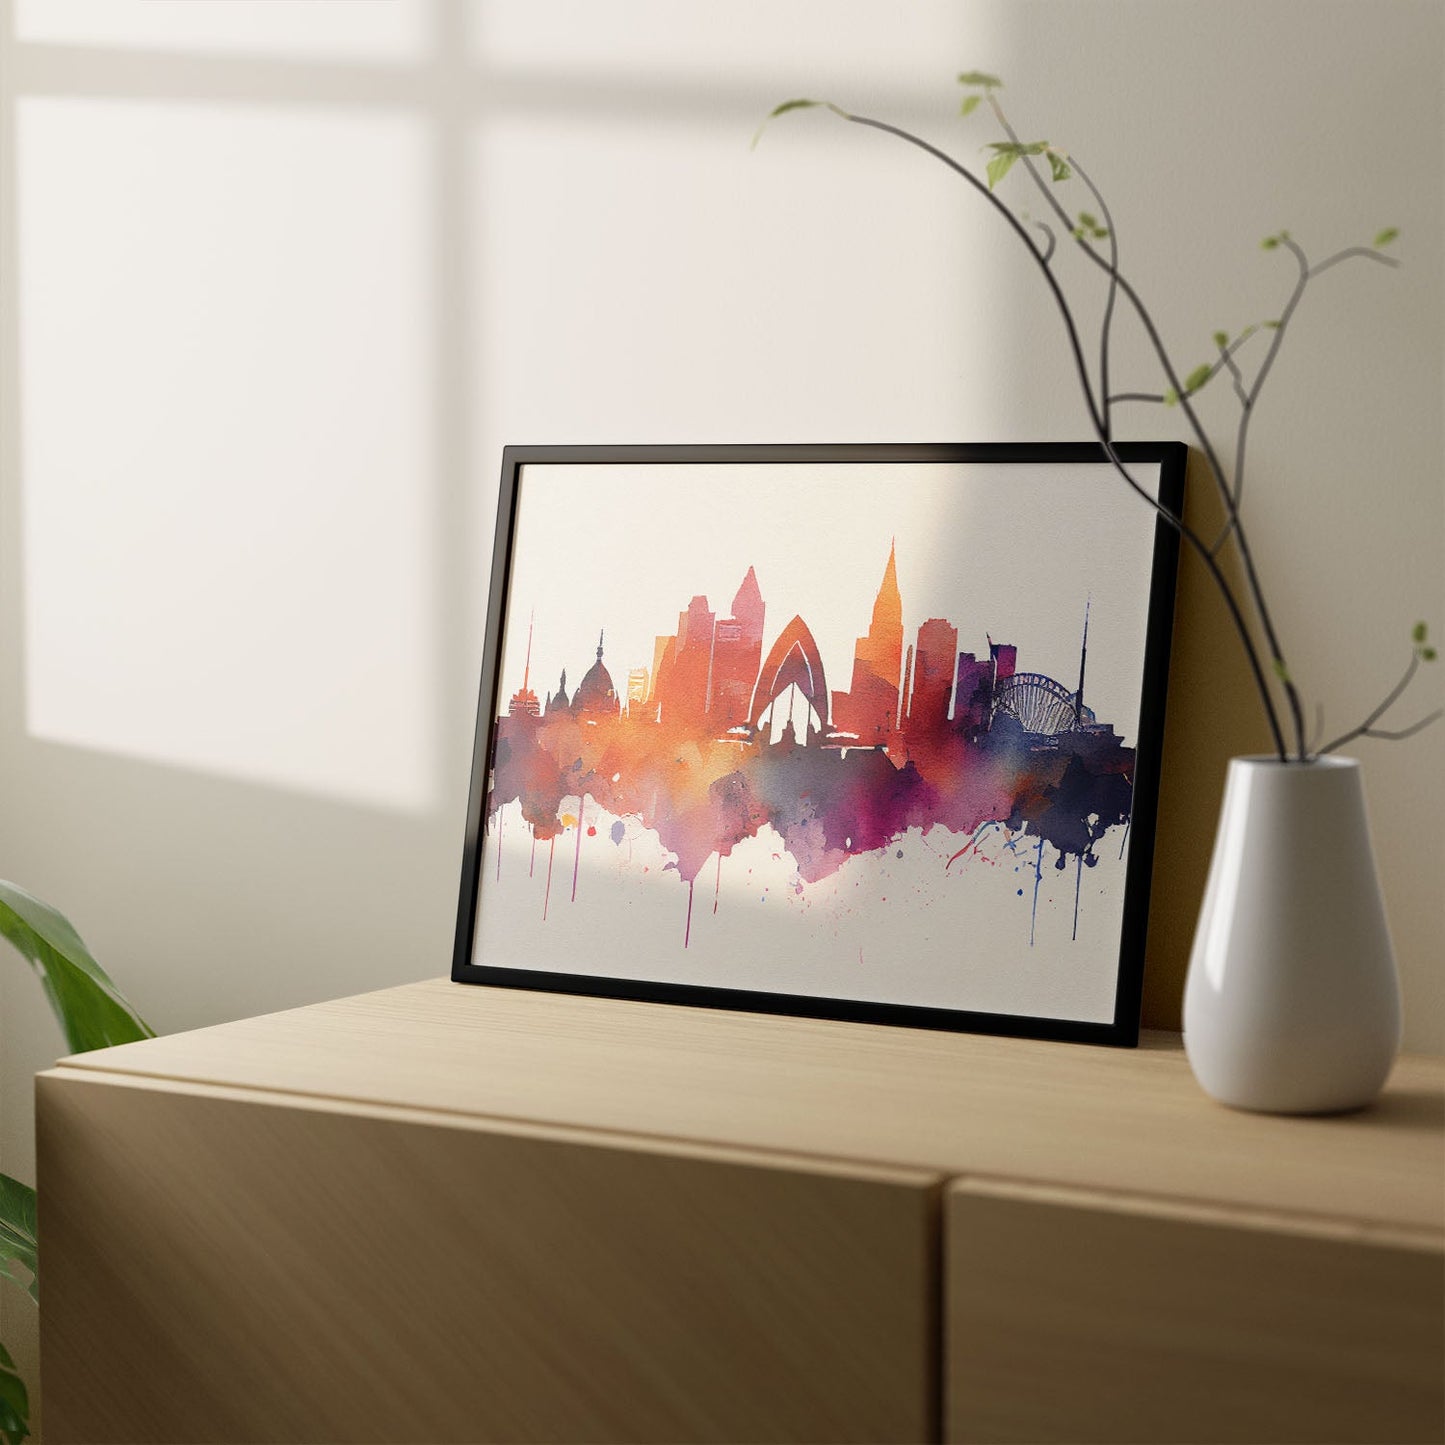 Nacnic watercolor of a skyline of the city of Sydney_2. Aesthetic Wall Art Prints for Bedroom or Living Room Design.-Artwork-Nacnic-A4-Sin Marco-Nacnic Estudio SL